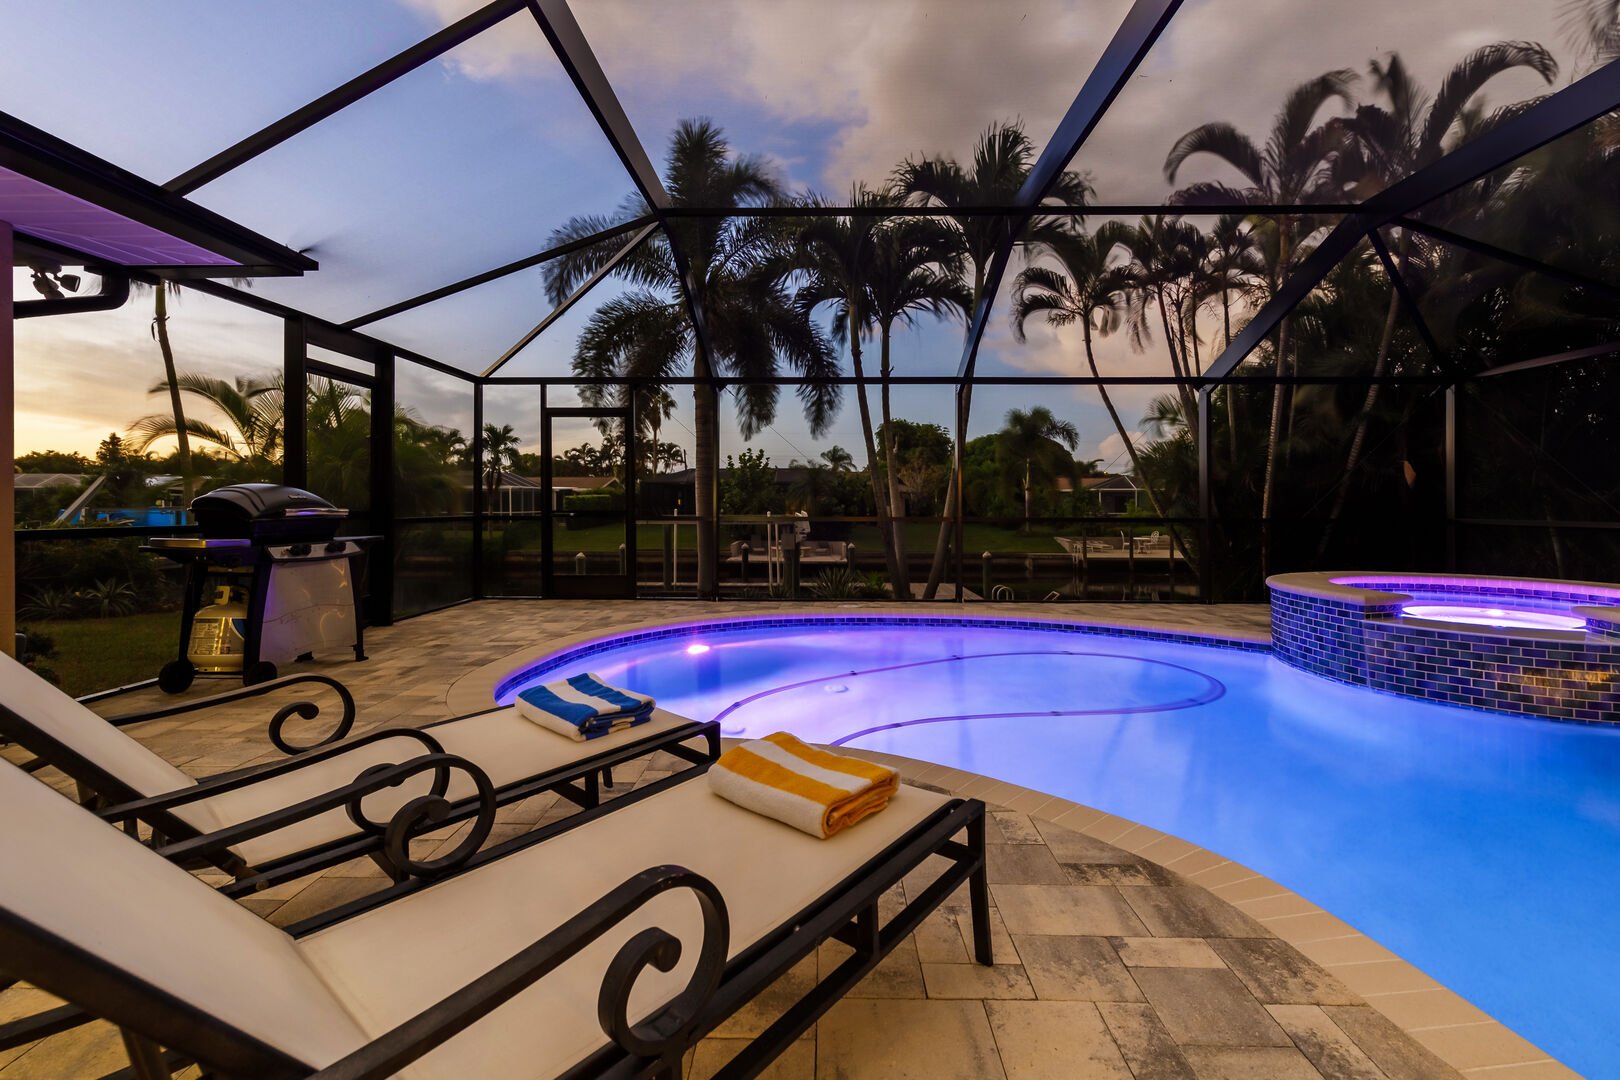 Private pool and spa in vacation rental